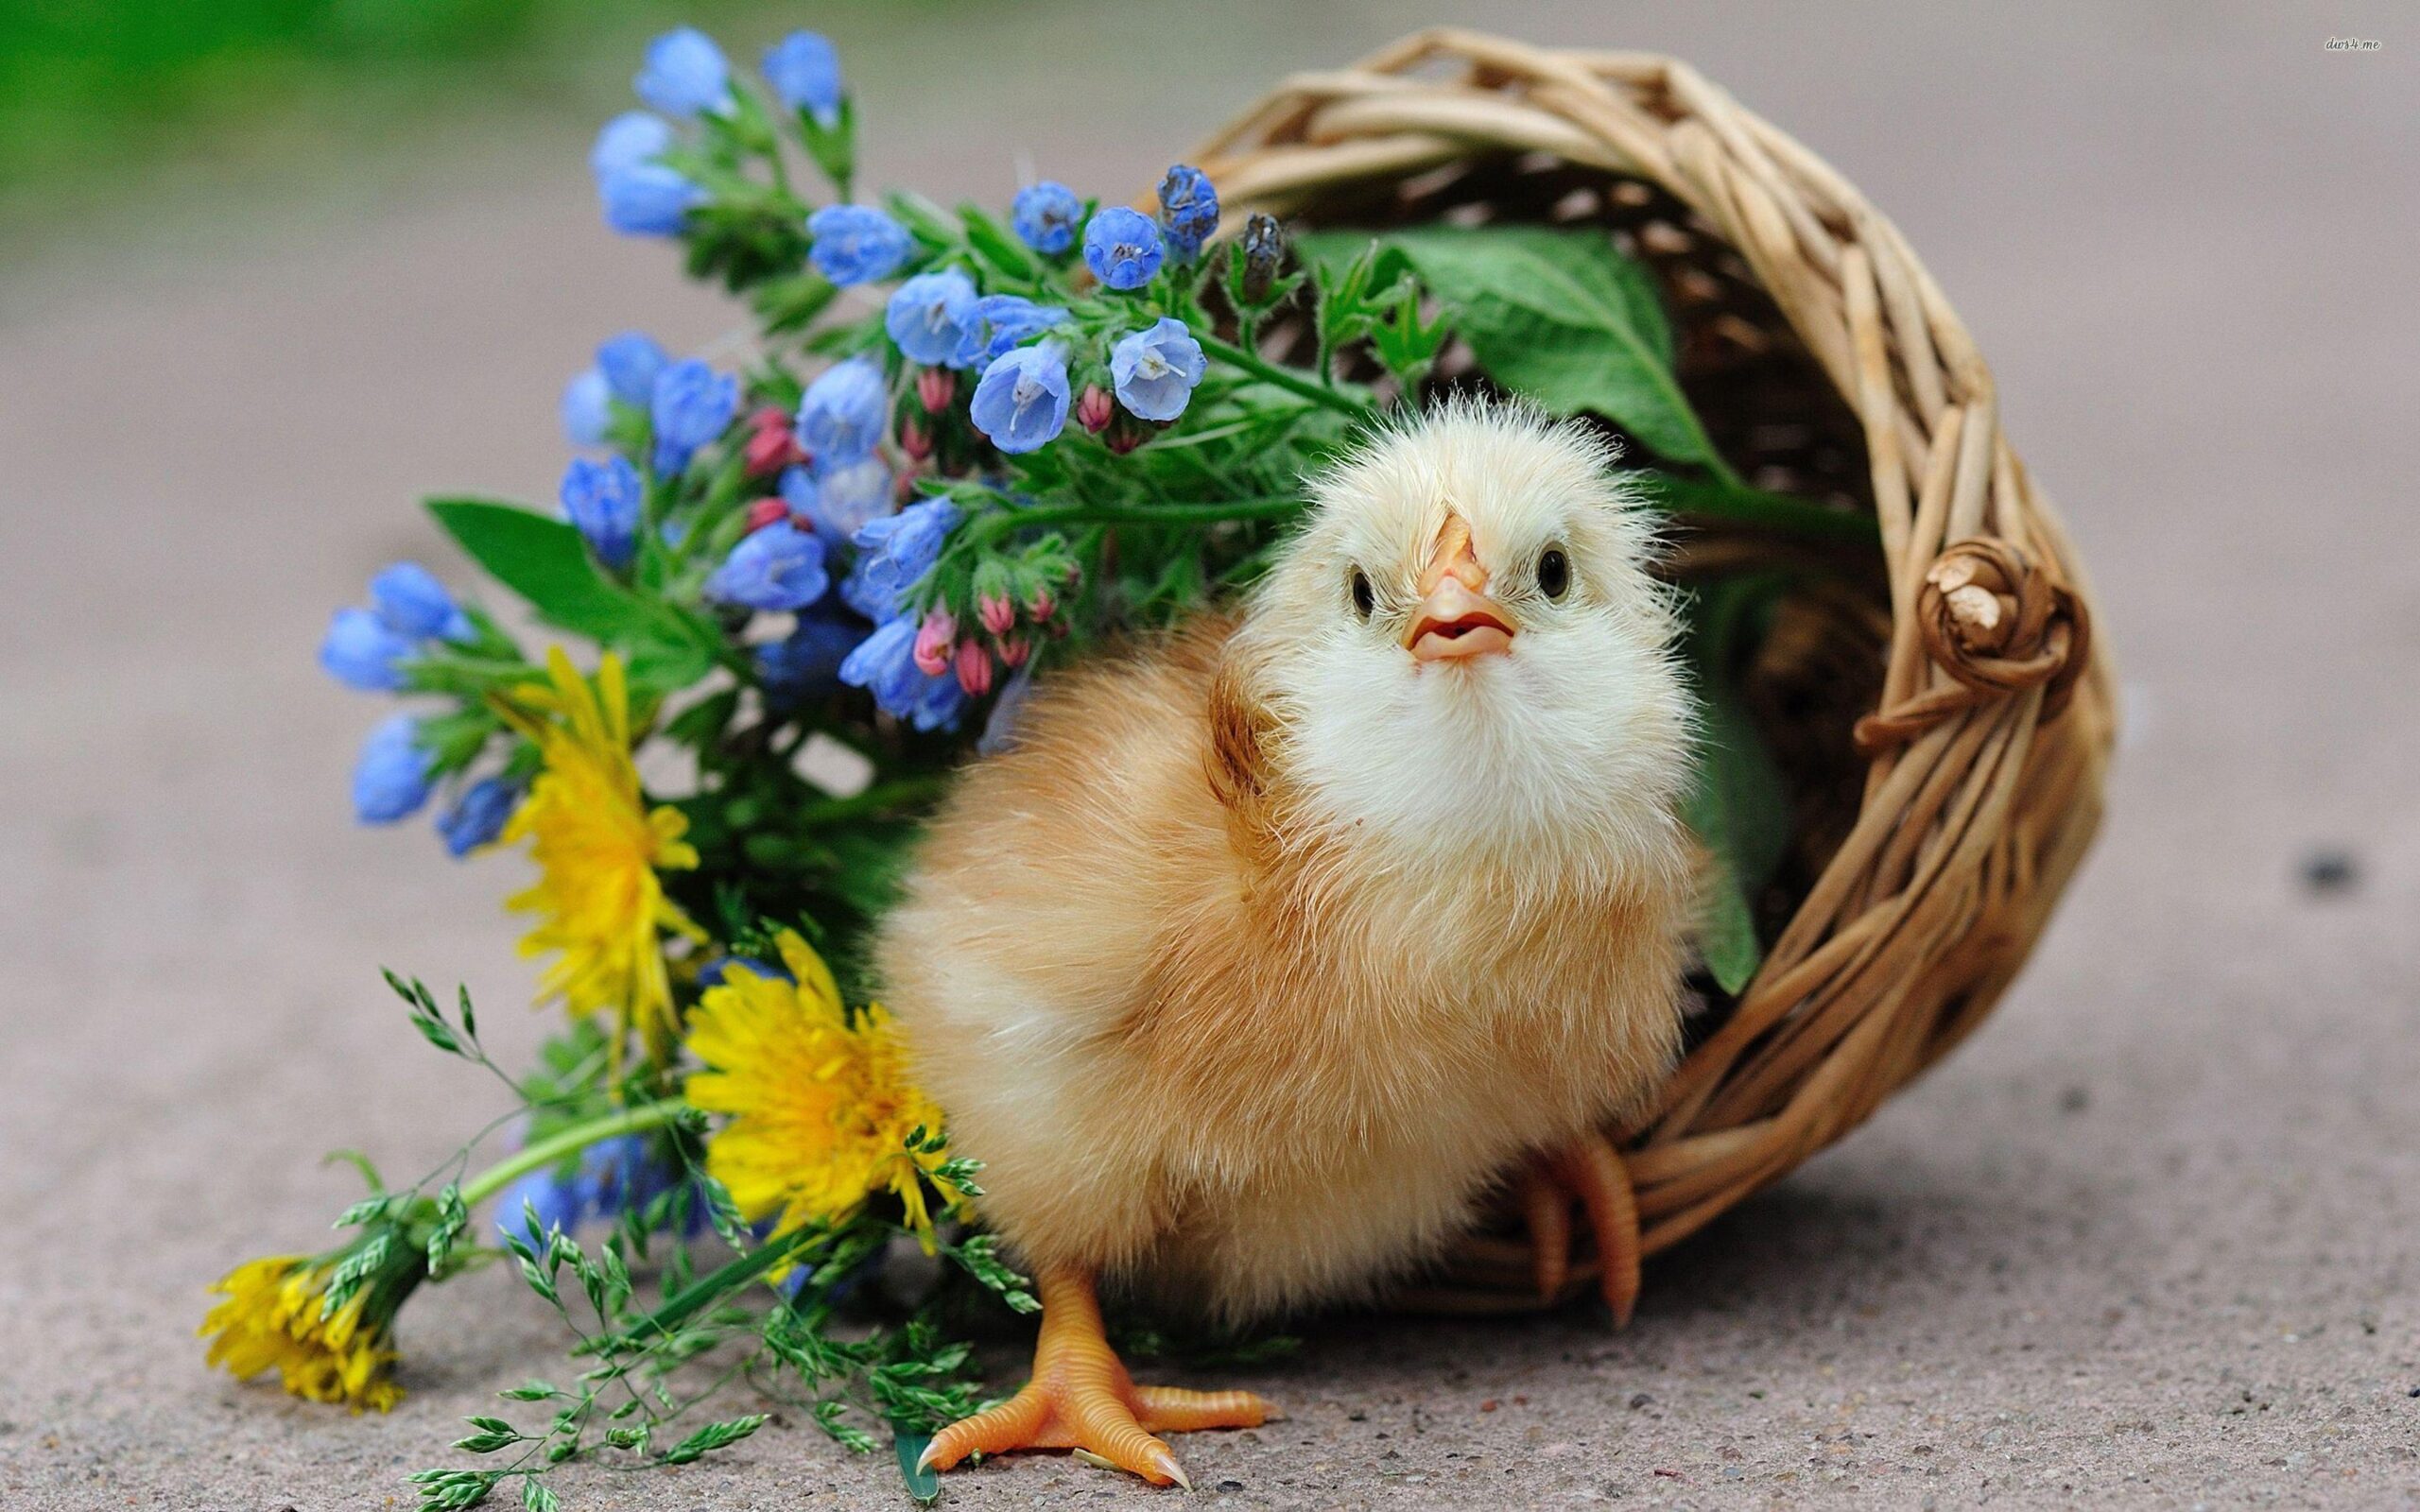 Chick in a floral basket wallpapers